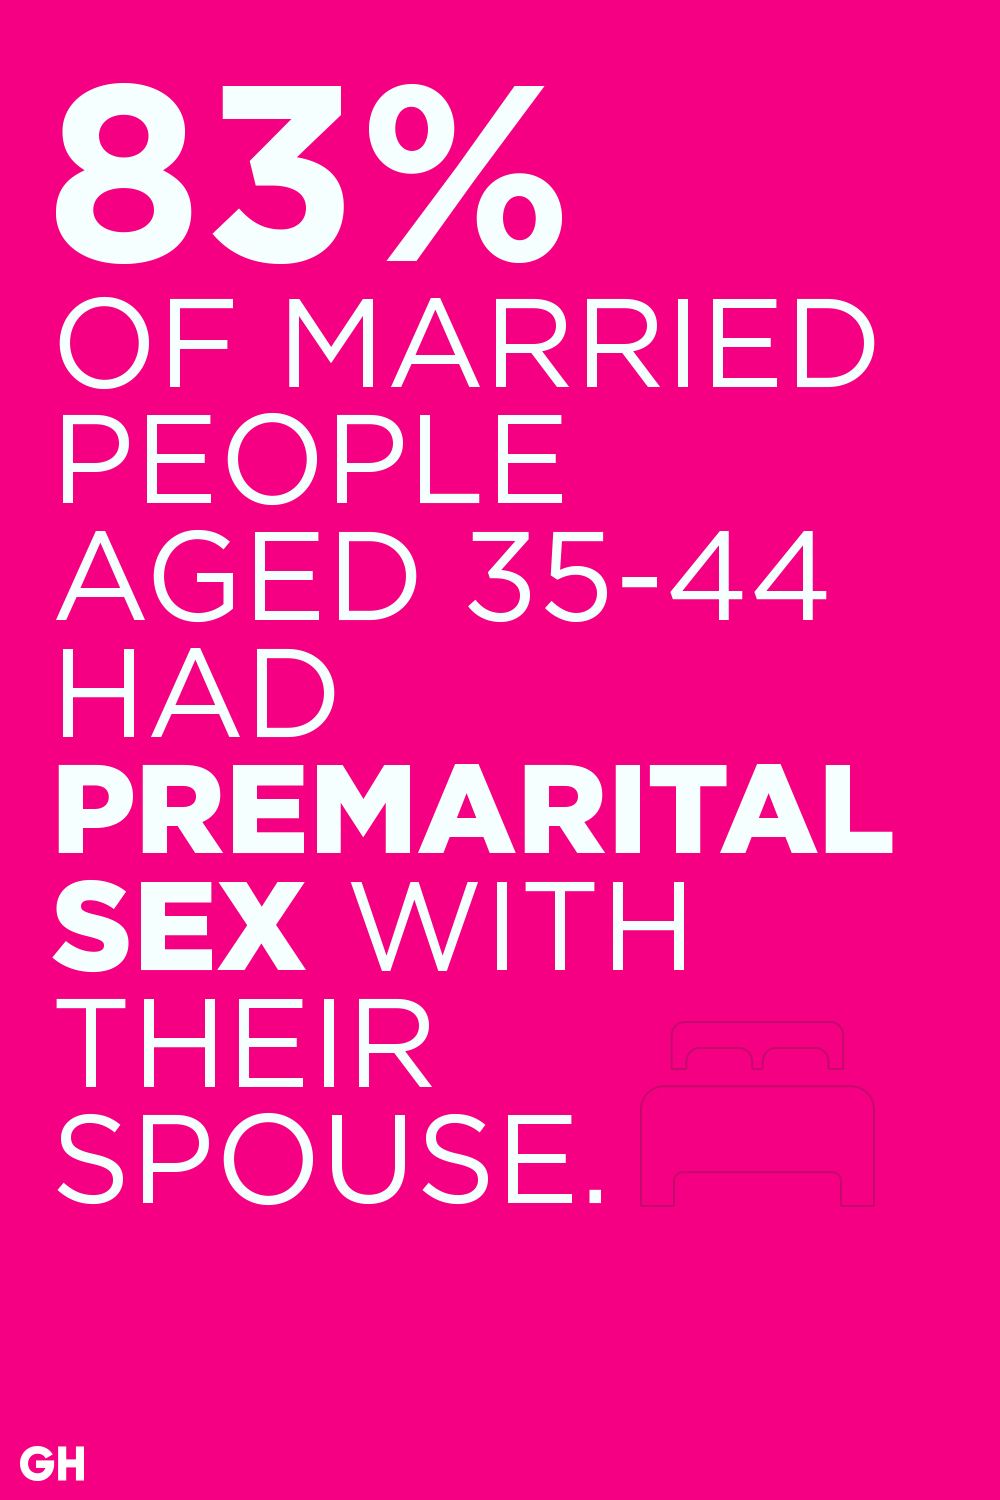 10 Surprising Statistics About Married